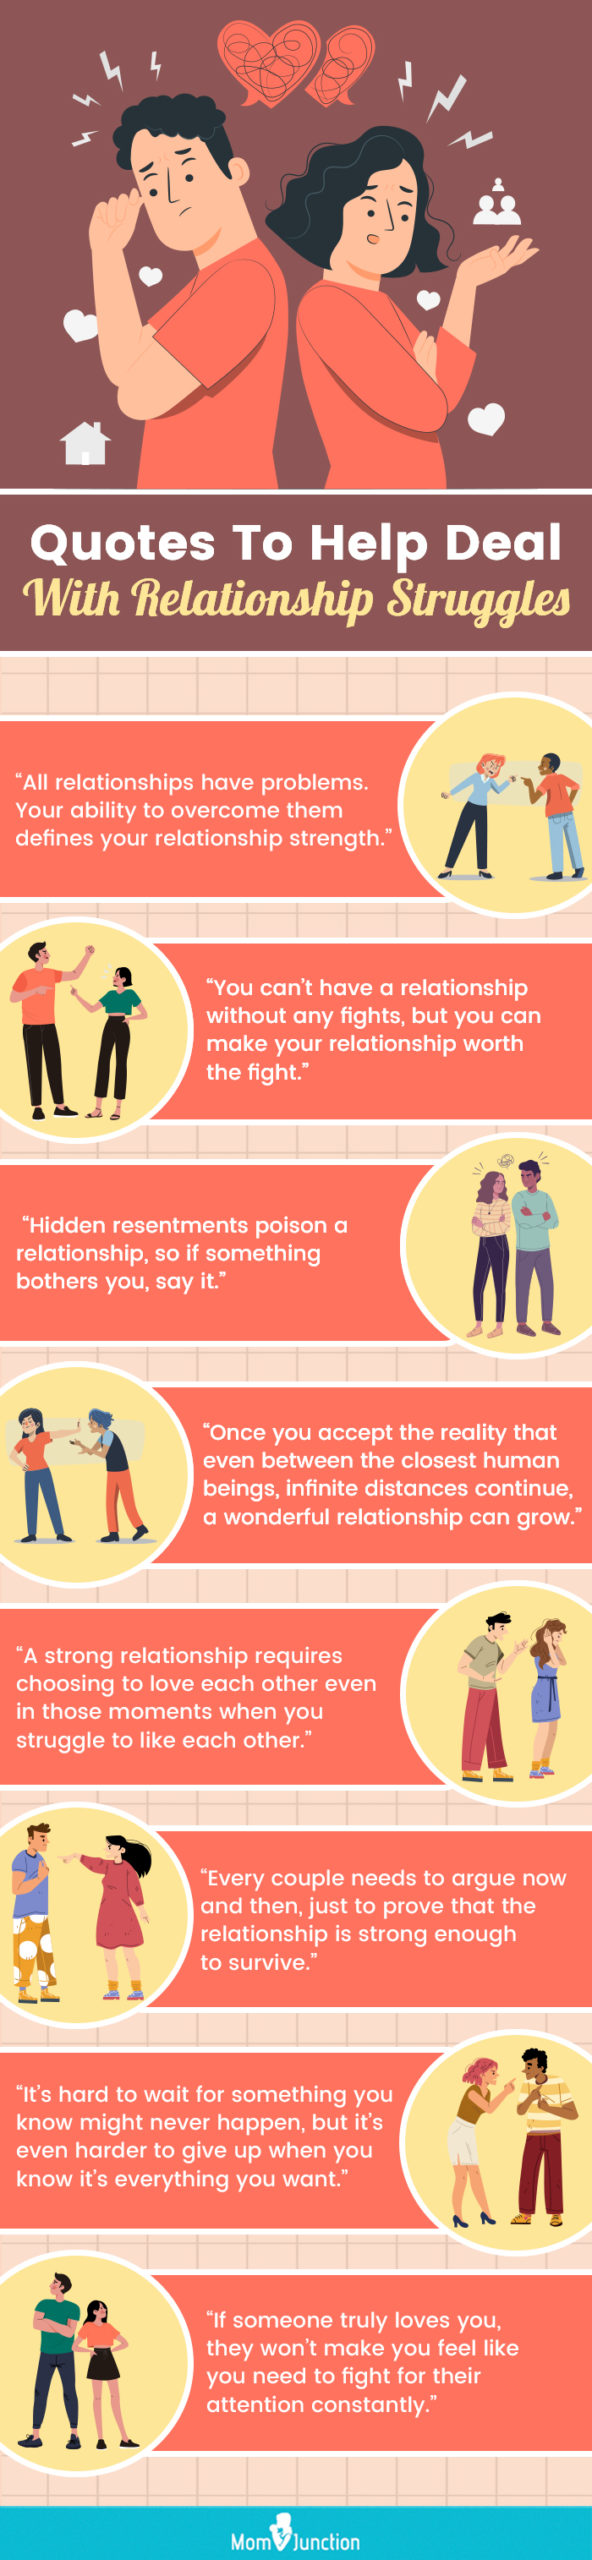 quotes to help deal with relationship struggles (infographic)